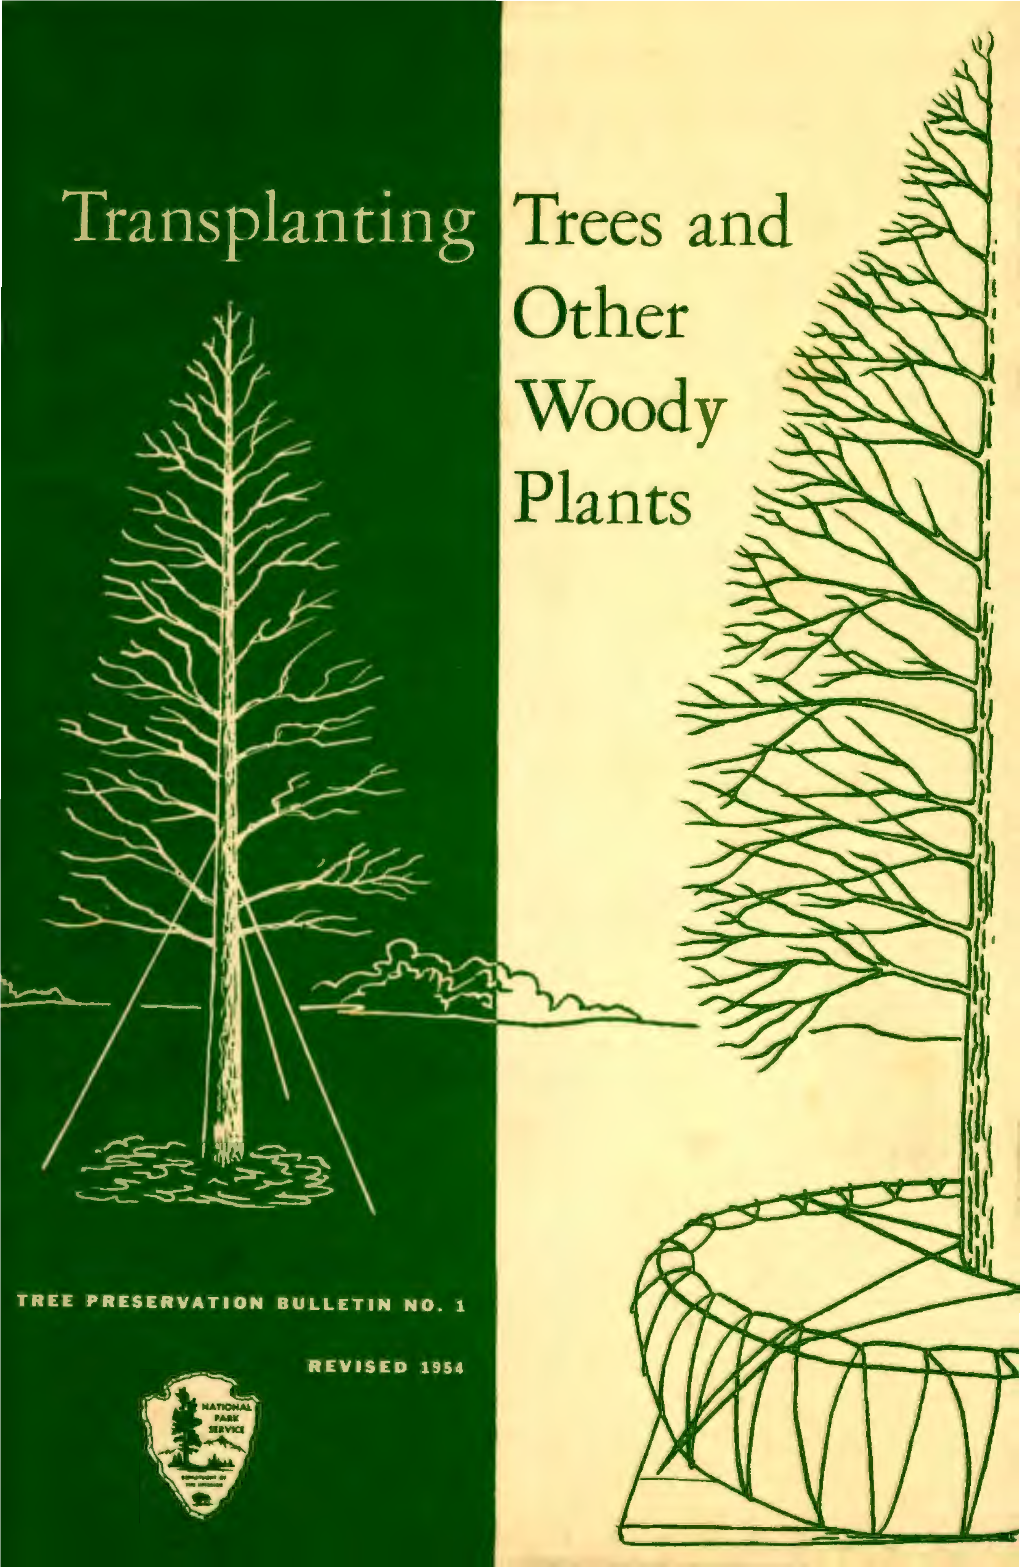 Transplanting Trees and Other Woody Plants